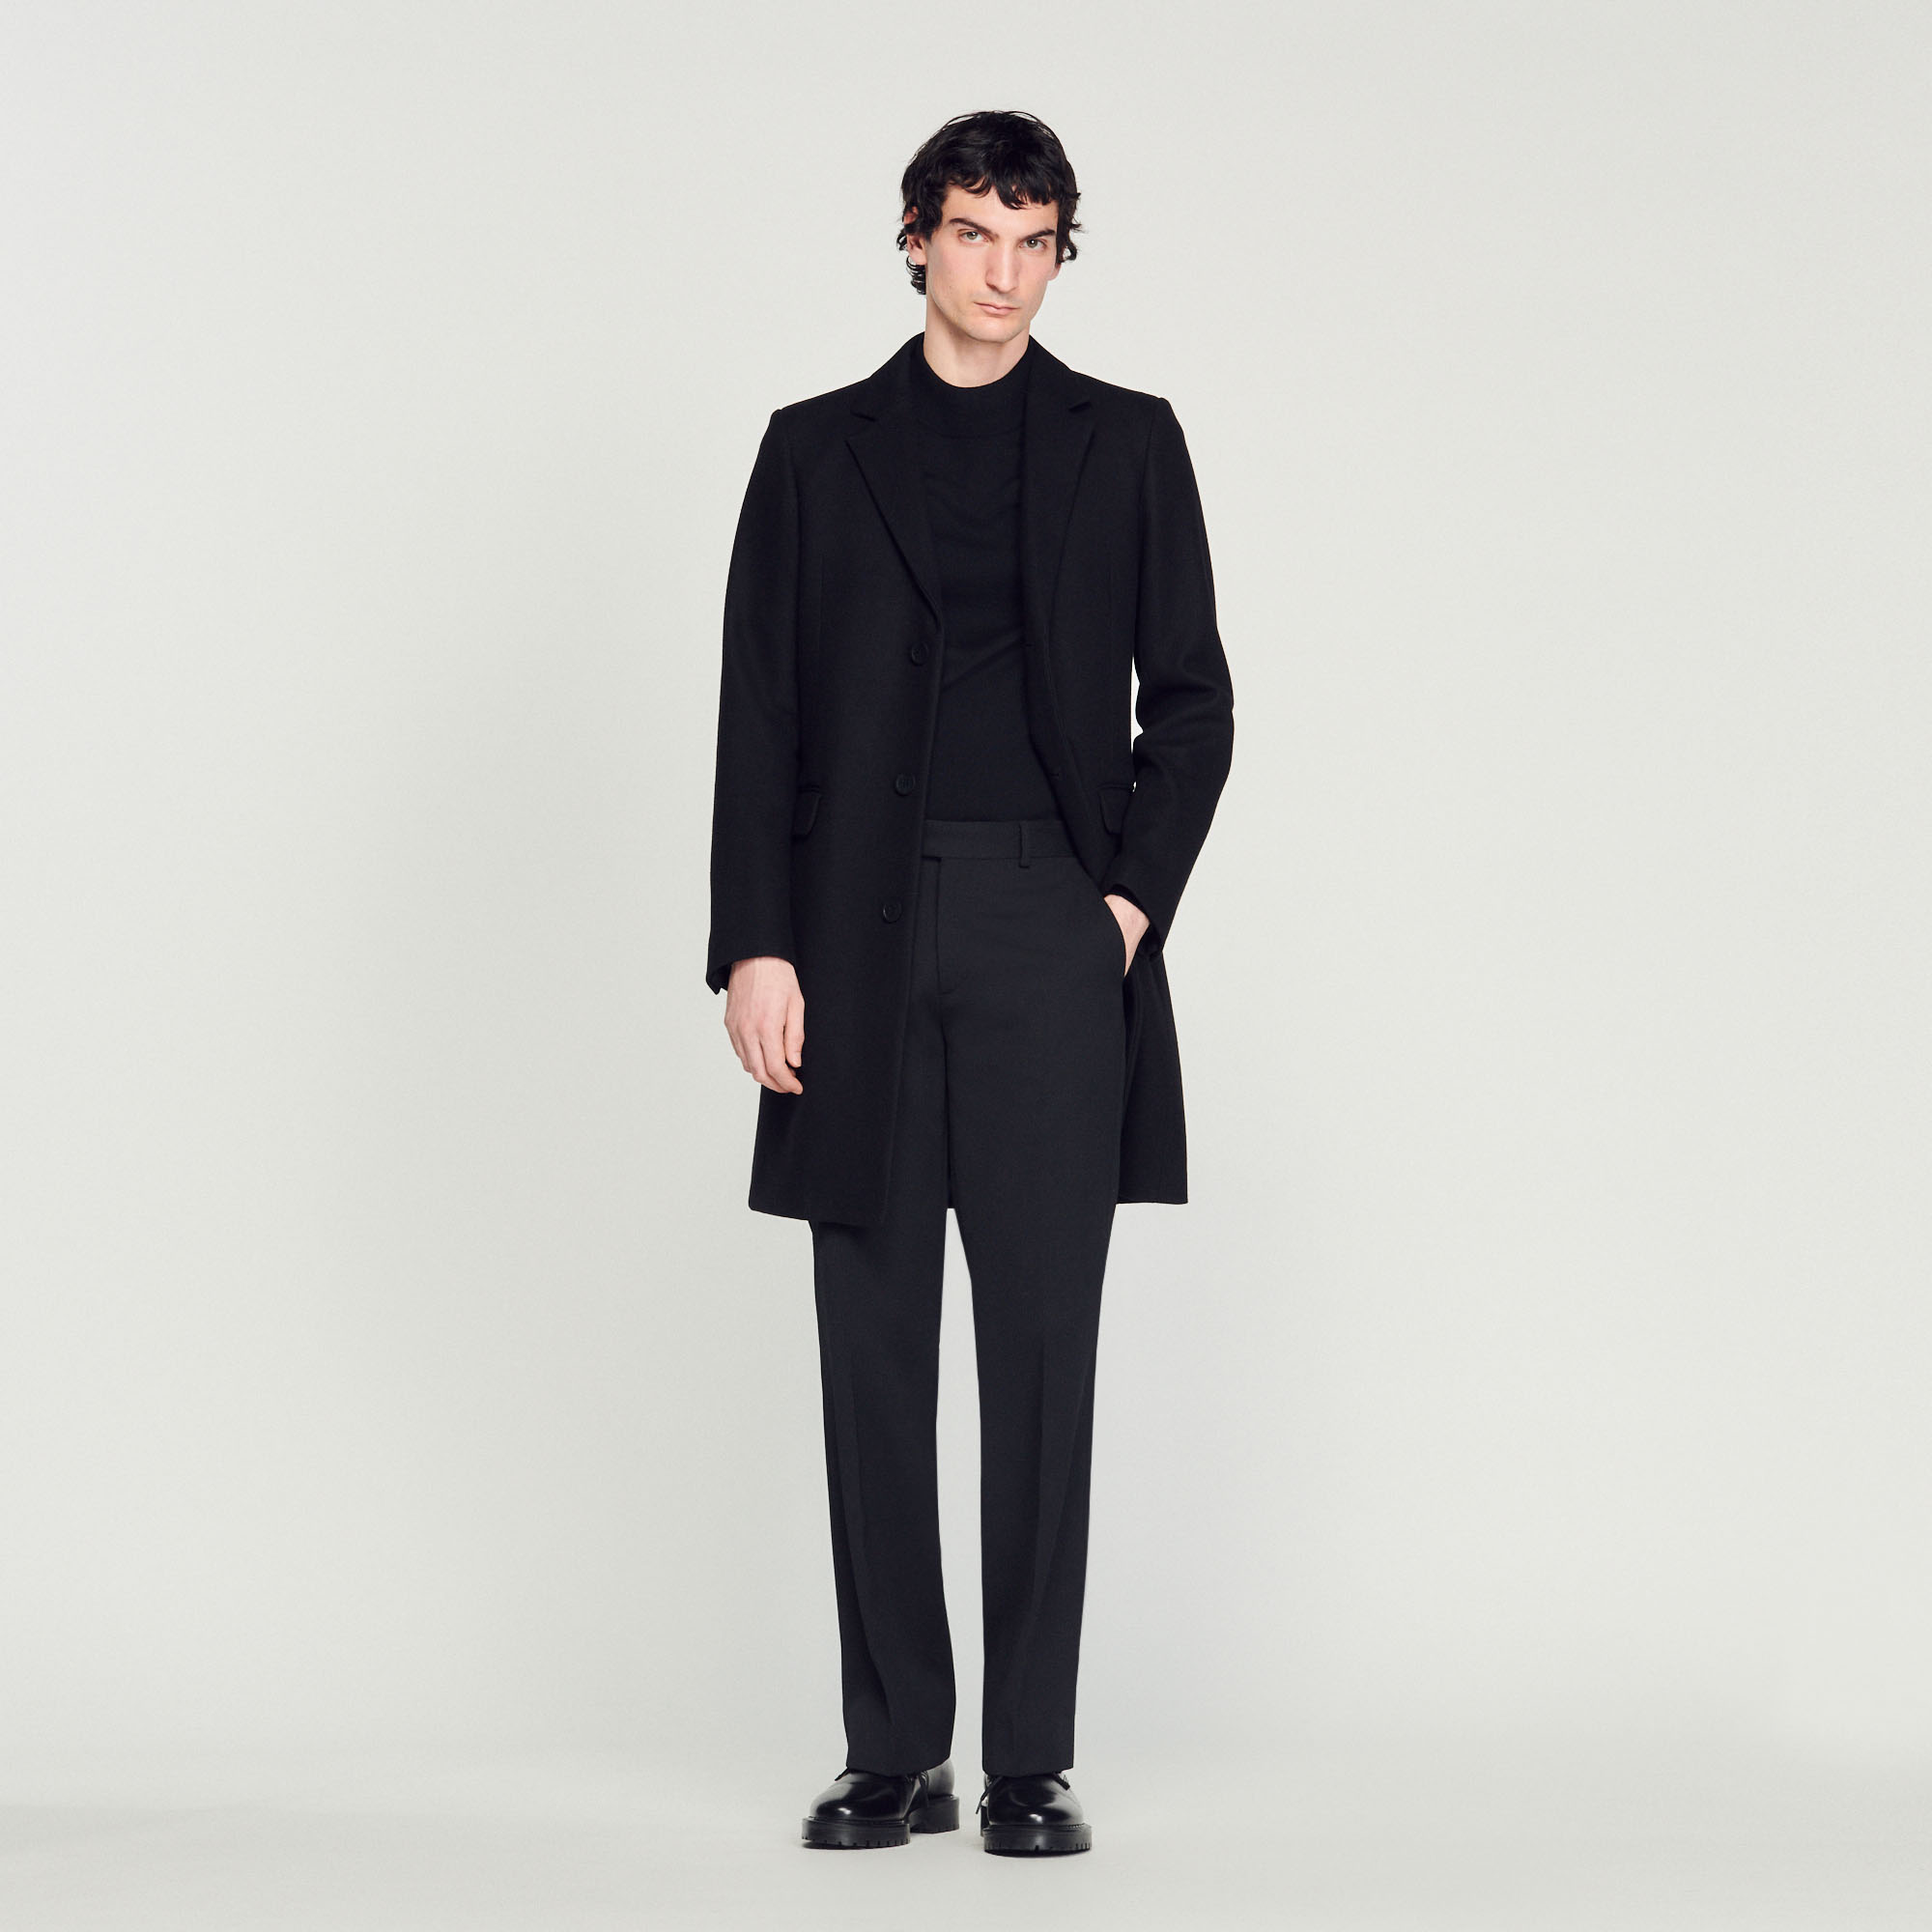 Sandro wool Sandro men's coat â€¢ Wool coat â€¢ Tailored collar â€¢ Fastened with three buttons â€¢ Side pockets with flap â€¢ Internal pockets â€¢ Vent at the back â€¢ Fitted cut Model is wearing a size S and is 6'1''